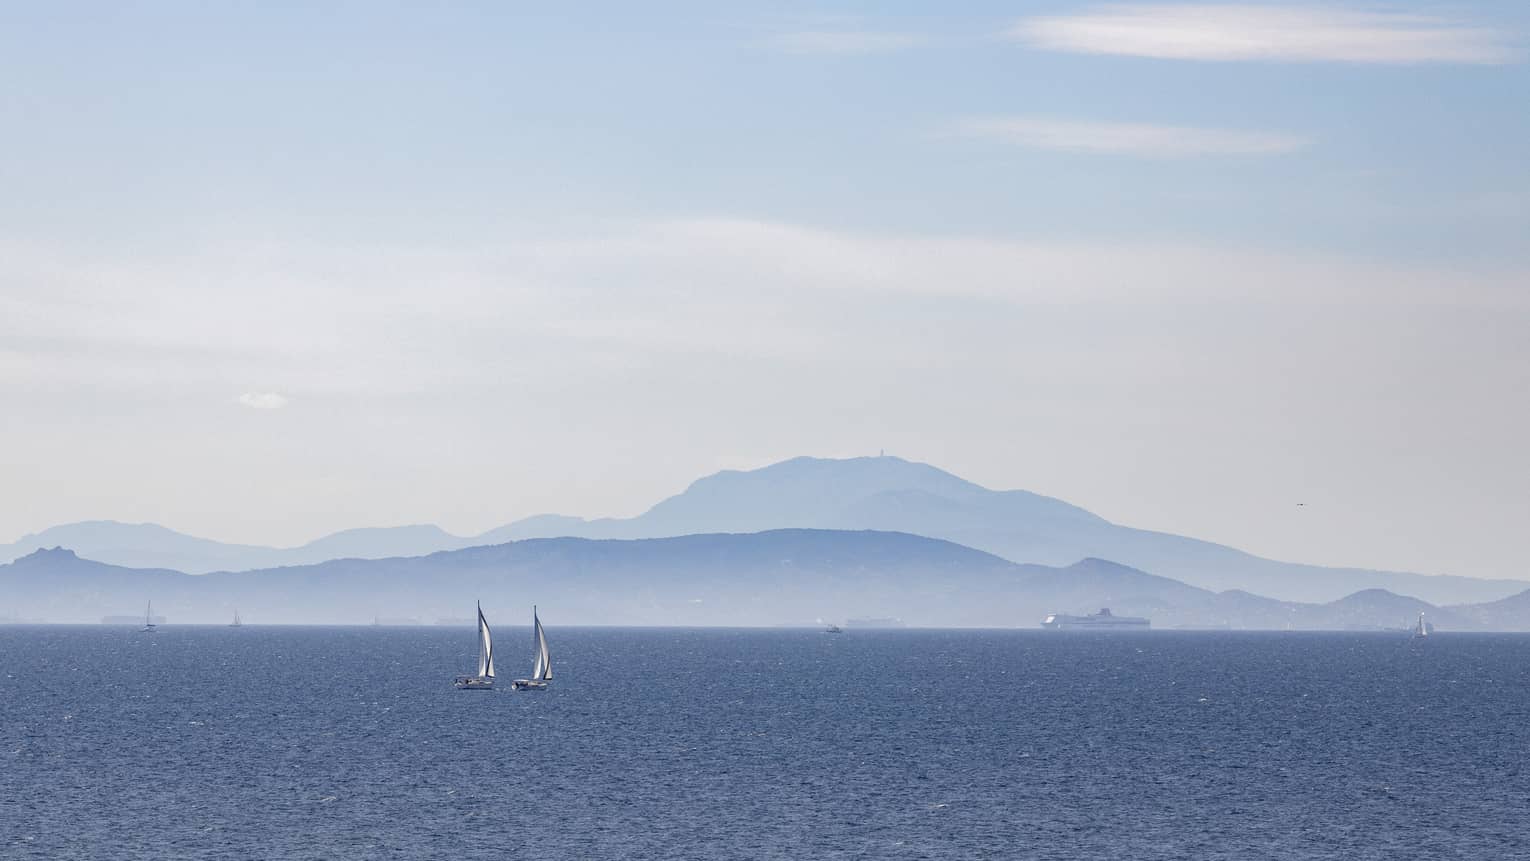 Two sailboats on blue ocean with blue-grey mountain range in the background 